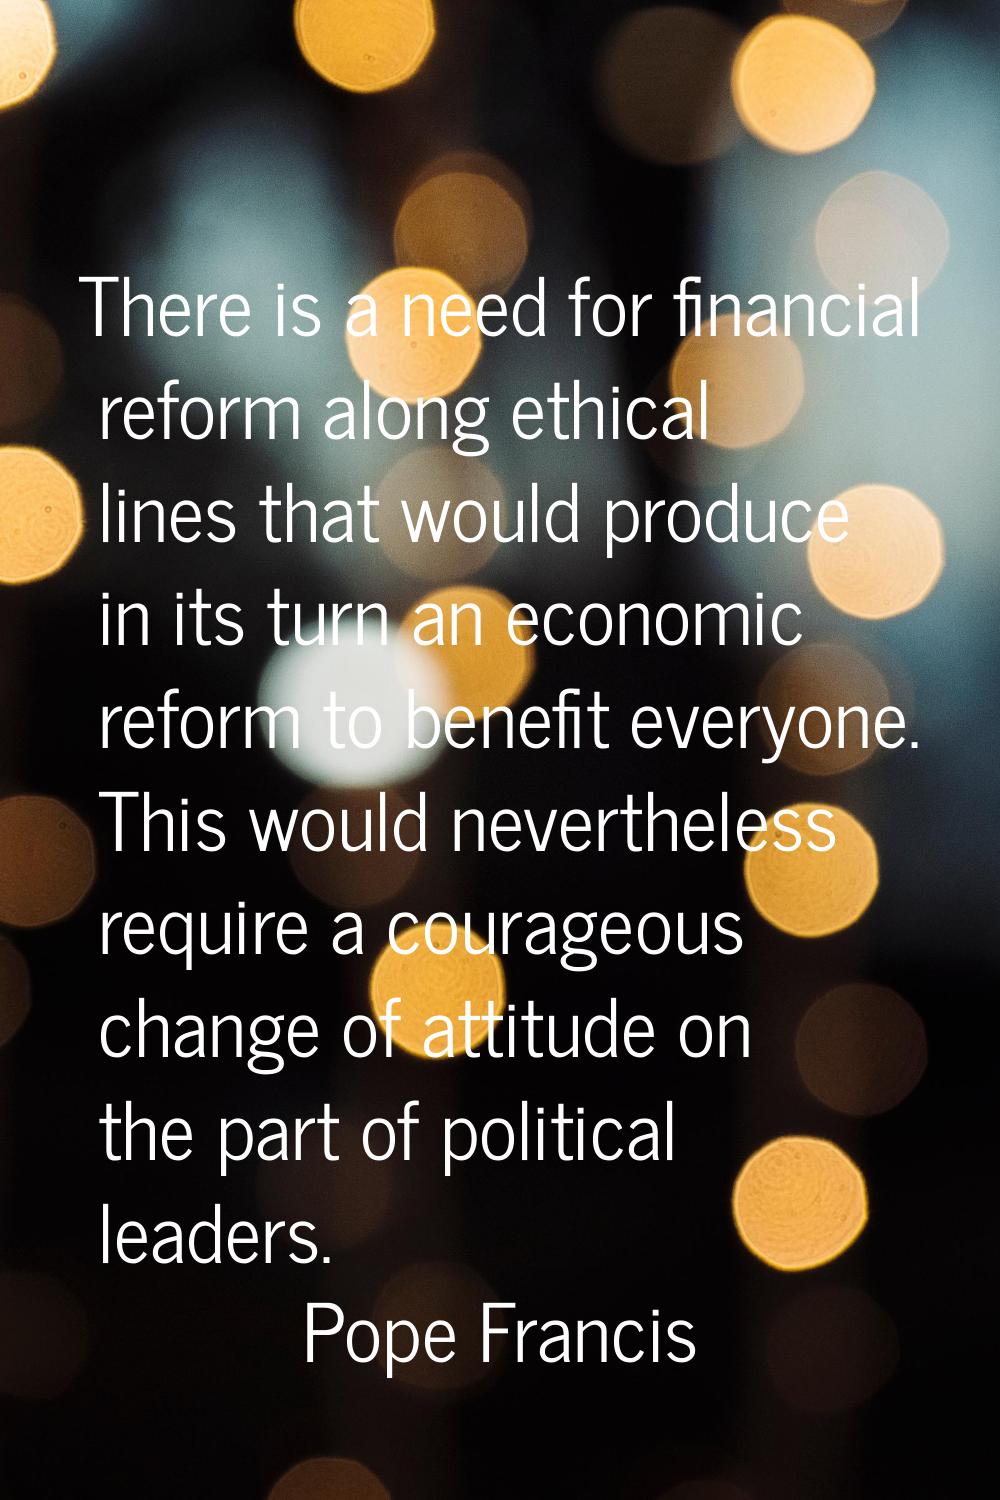 There is a need for financial reform along ethical lines that would produce in its turn an economic